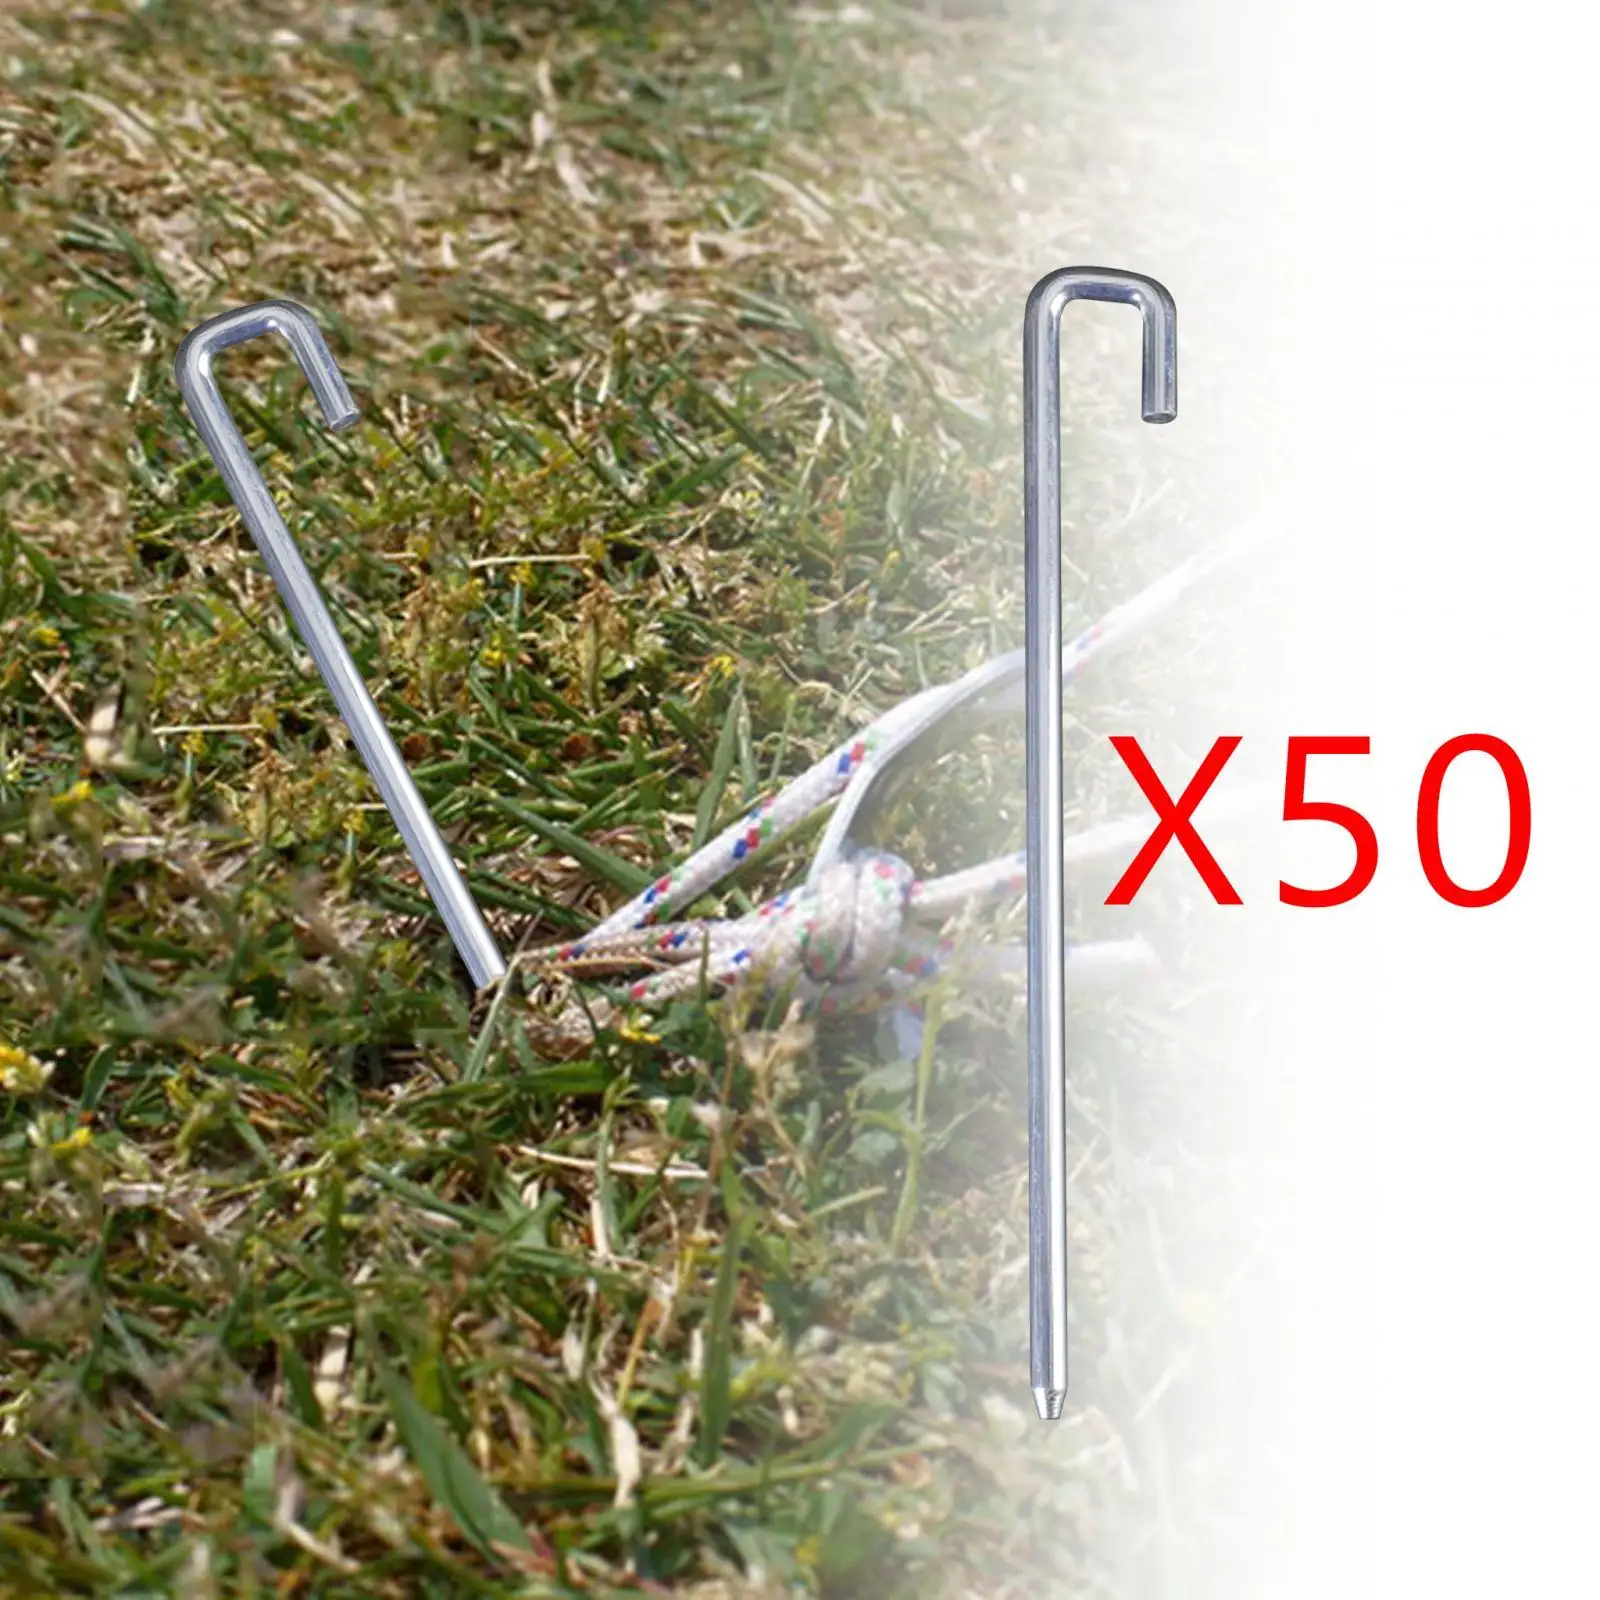 Pack of 50 Tent Pegs Nails 9.8inch U Shape Hook Aluminum for Patio Canopies, Garden Nets Accessory Yard Stakes Multifunctional